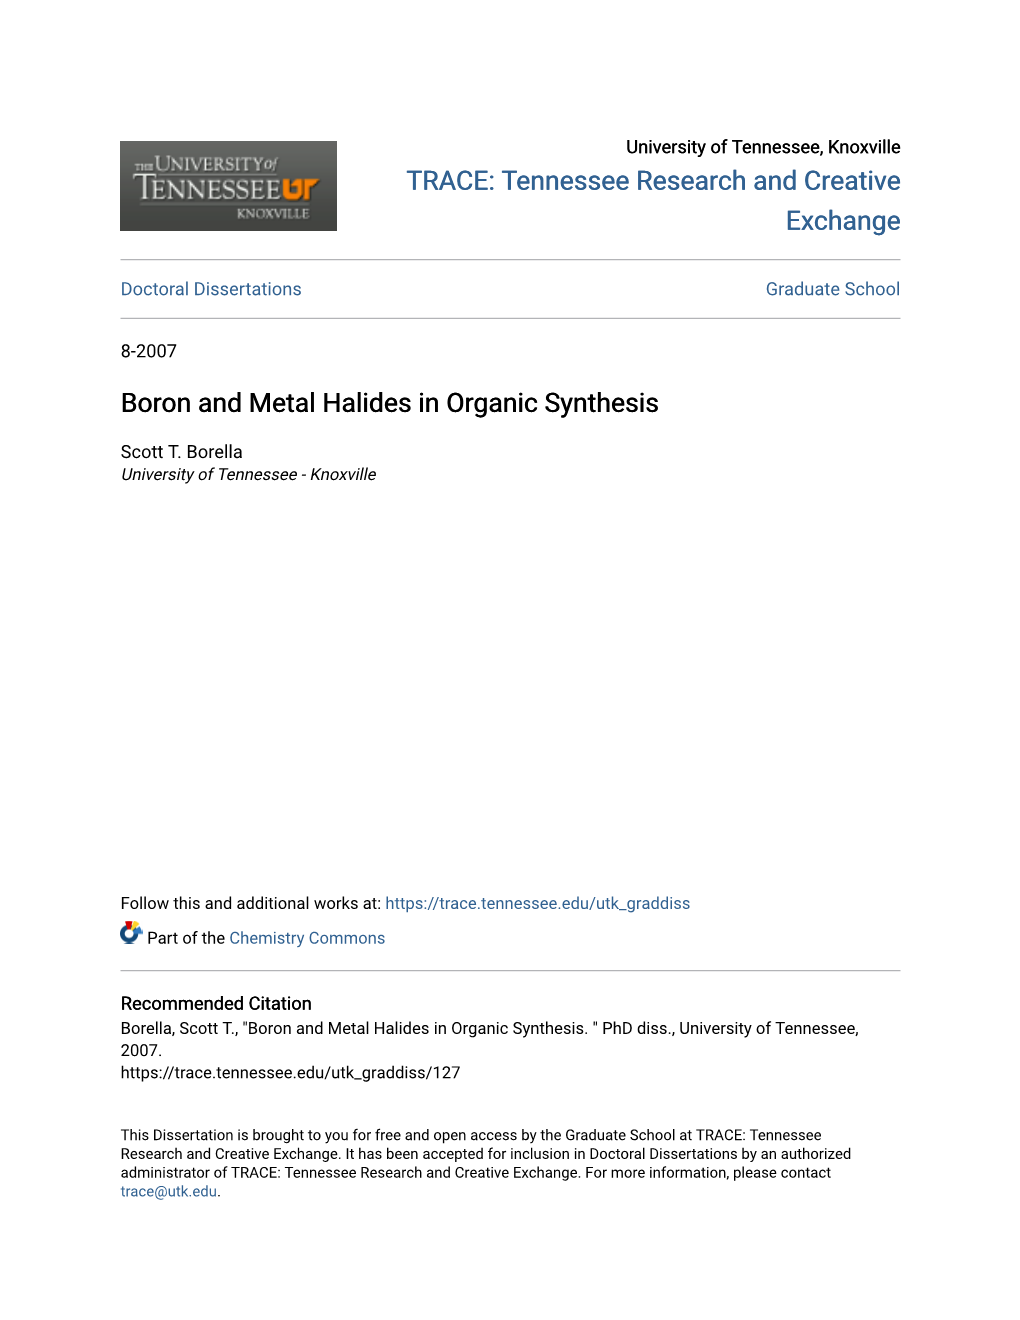 Boron and Metal Halides in Organic Synthesis